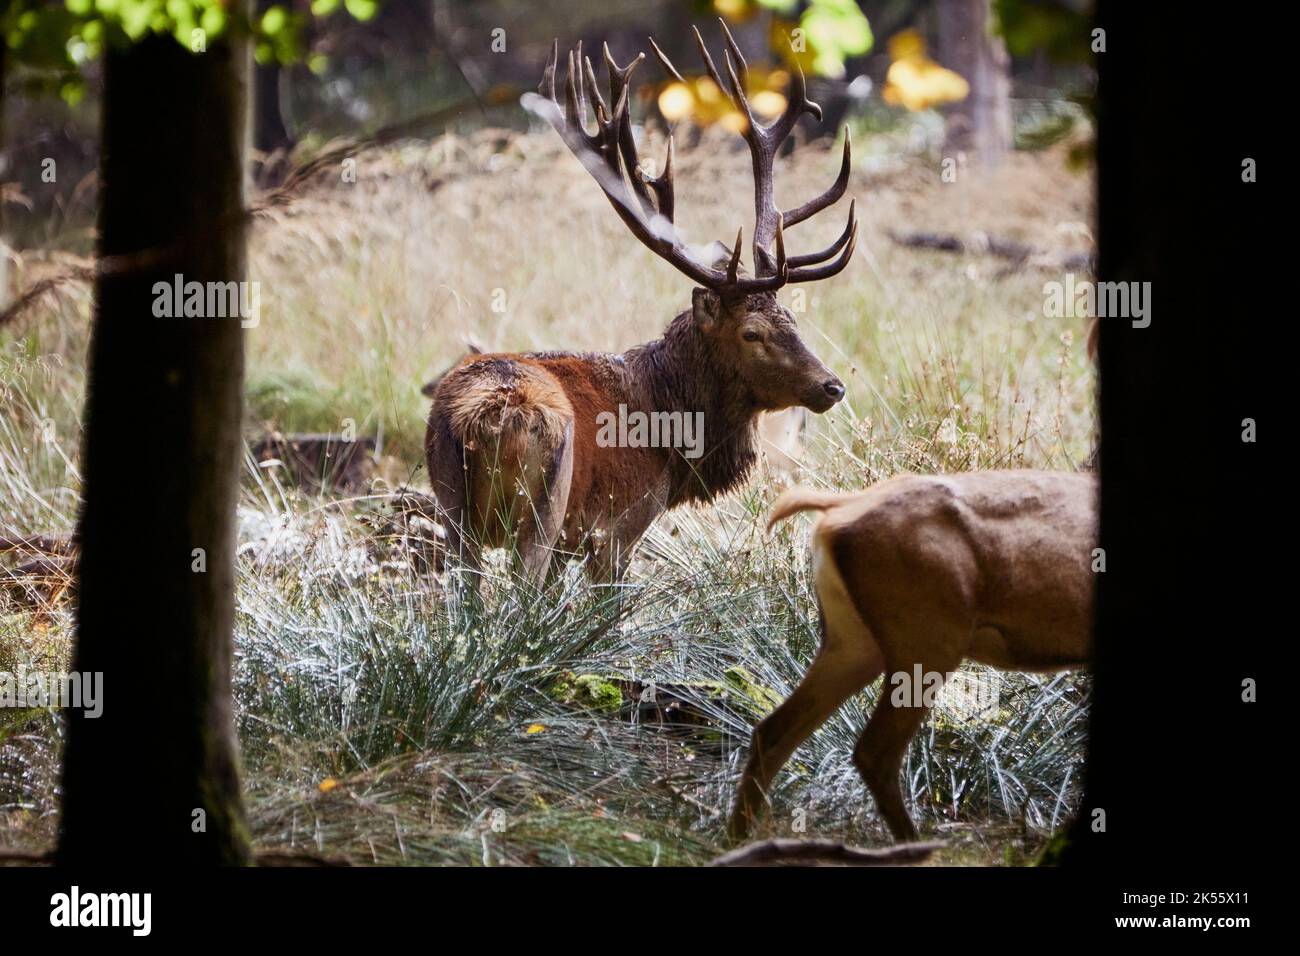 Deer with large antlers in forest Stock Photo